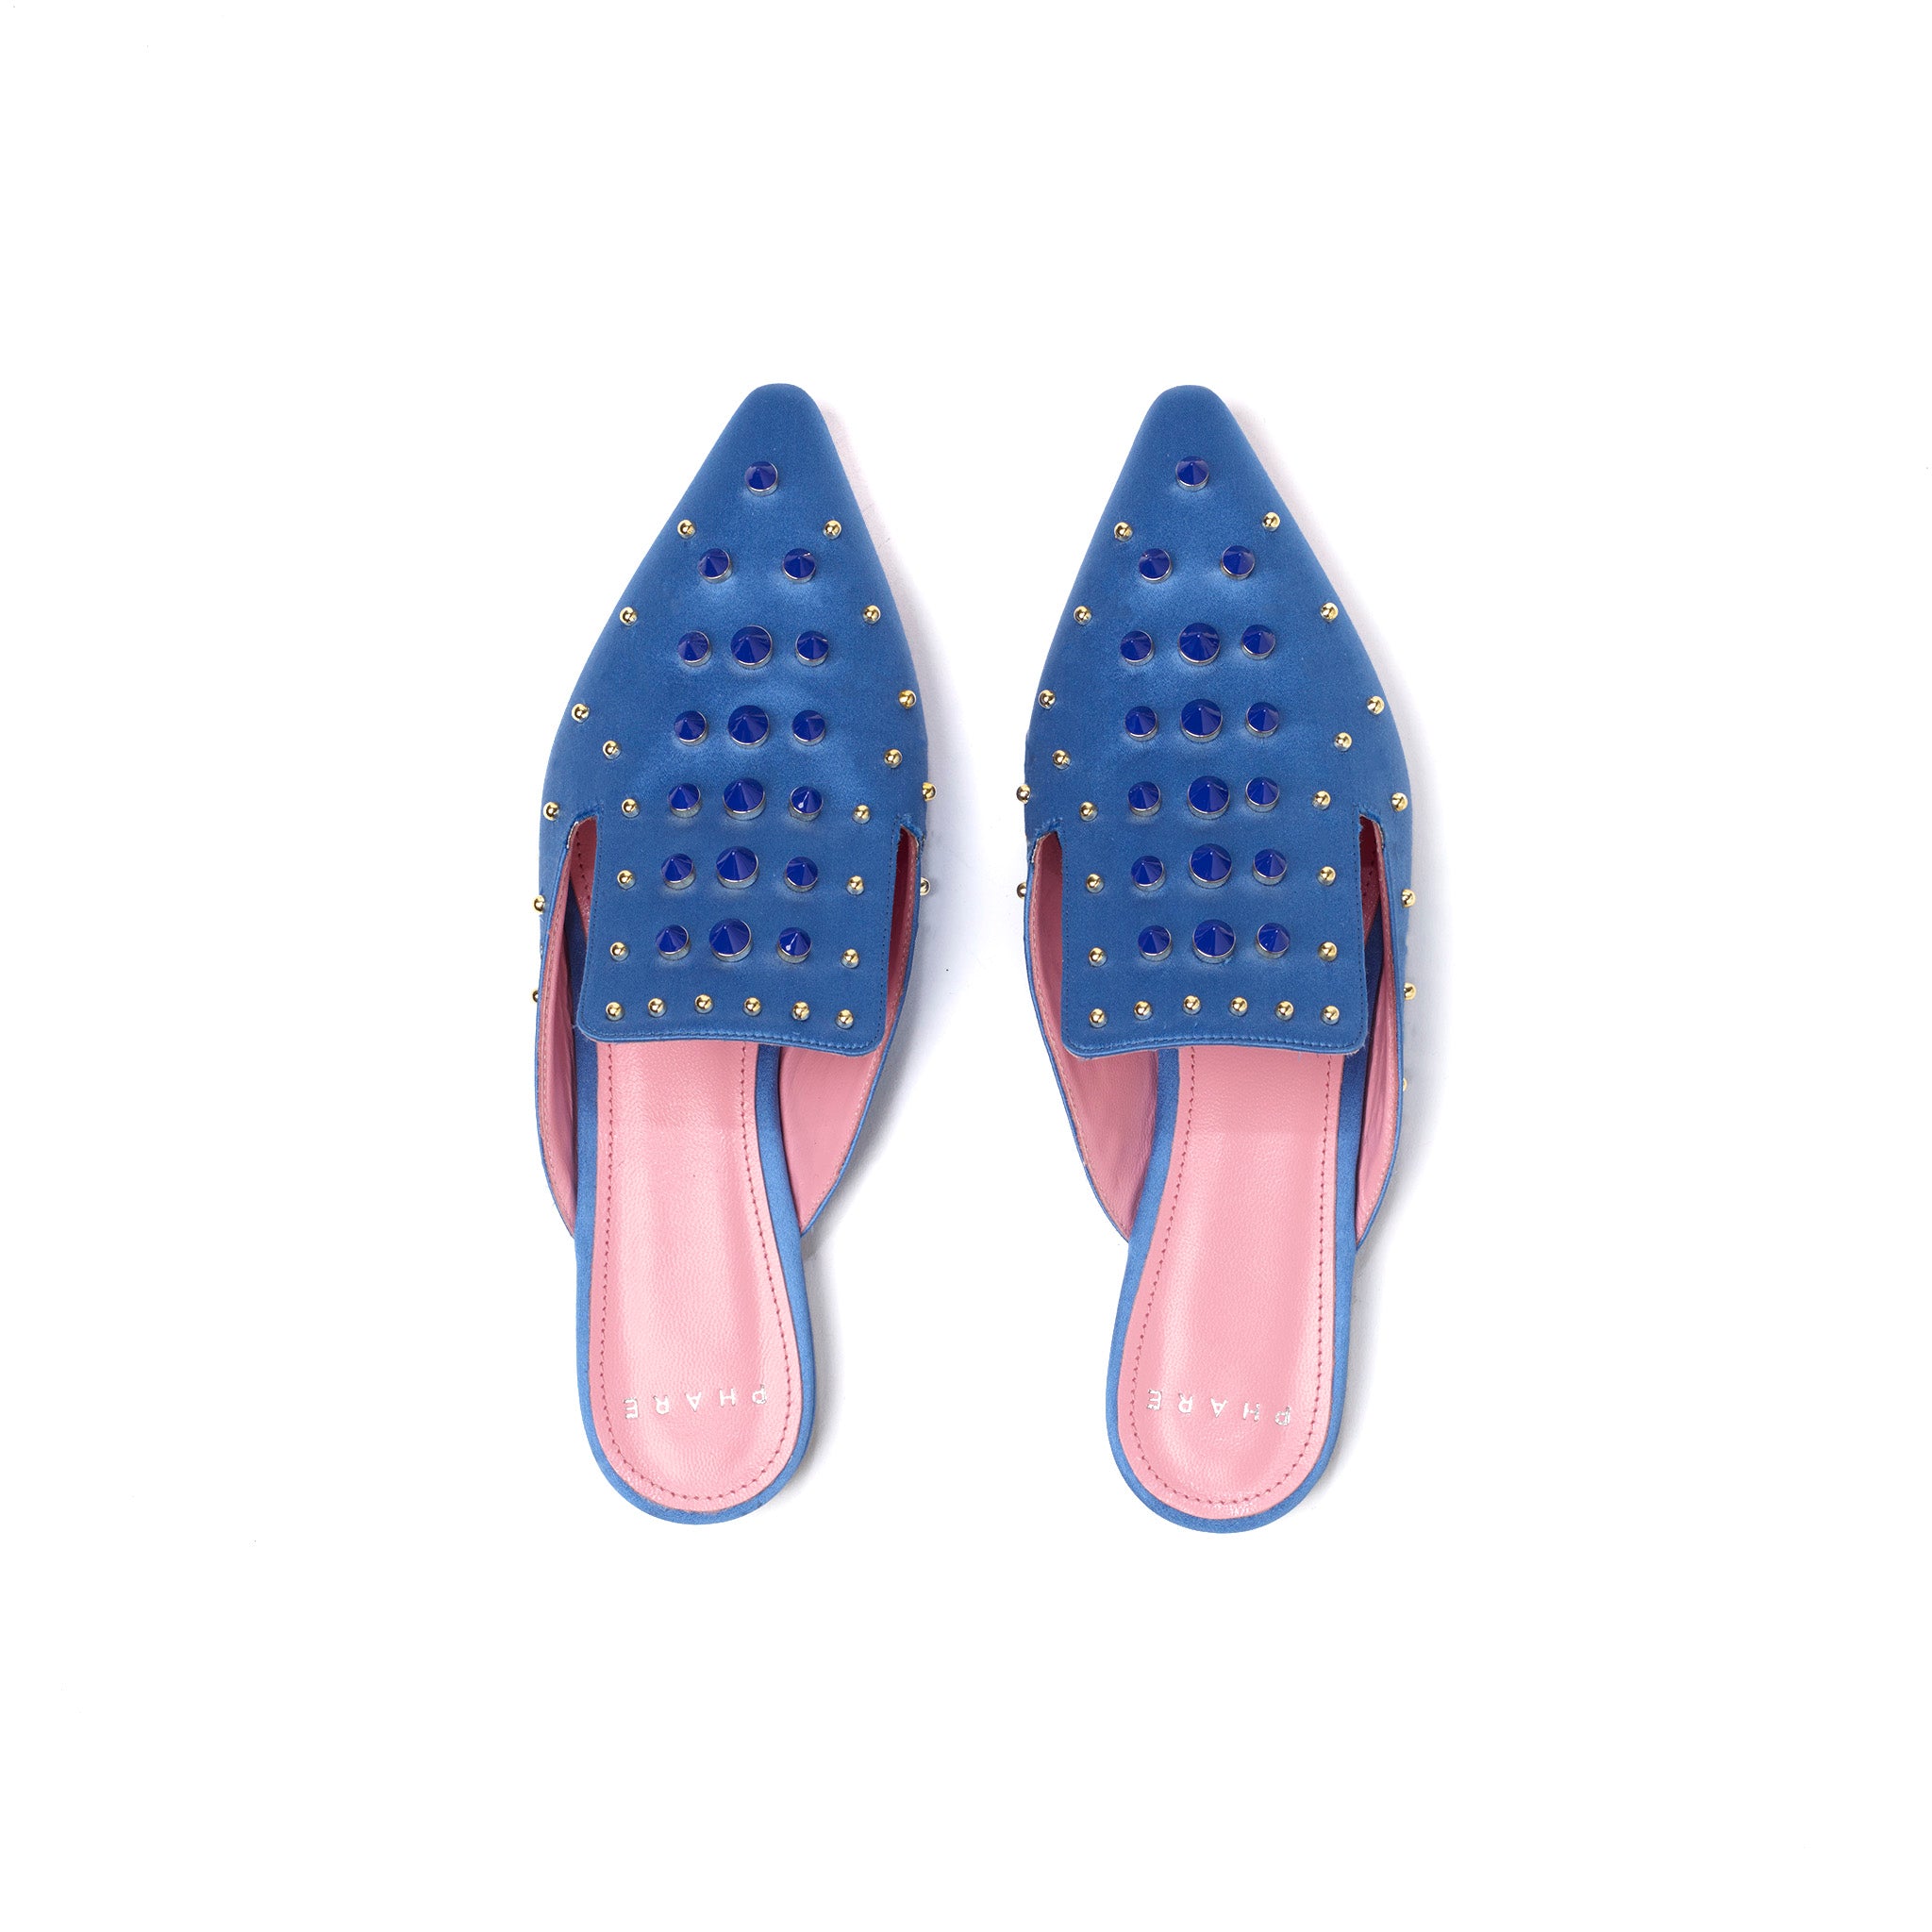 Phare Studded mule in cielo silk satin with blue and gold studs top view 